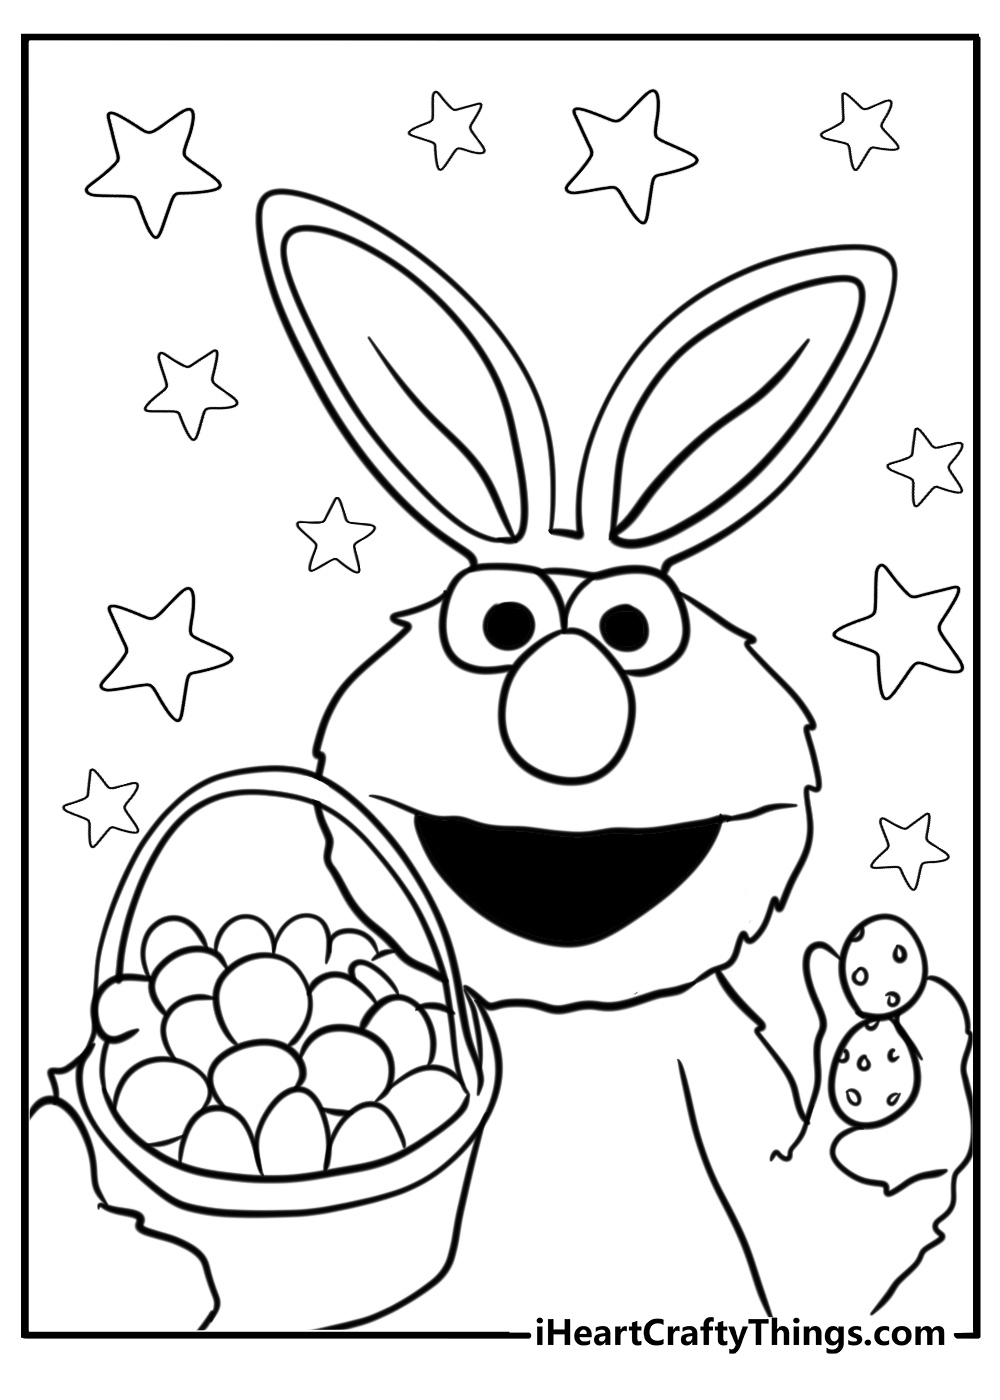 Easter themed elmo coloring page